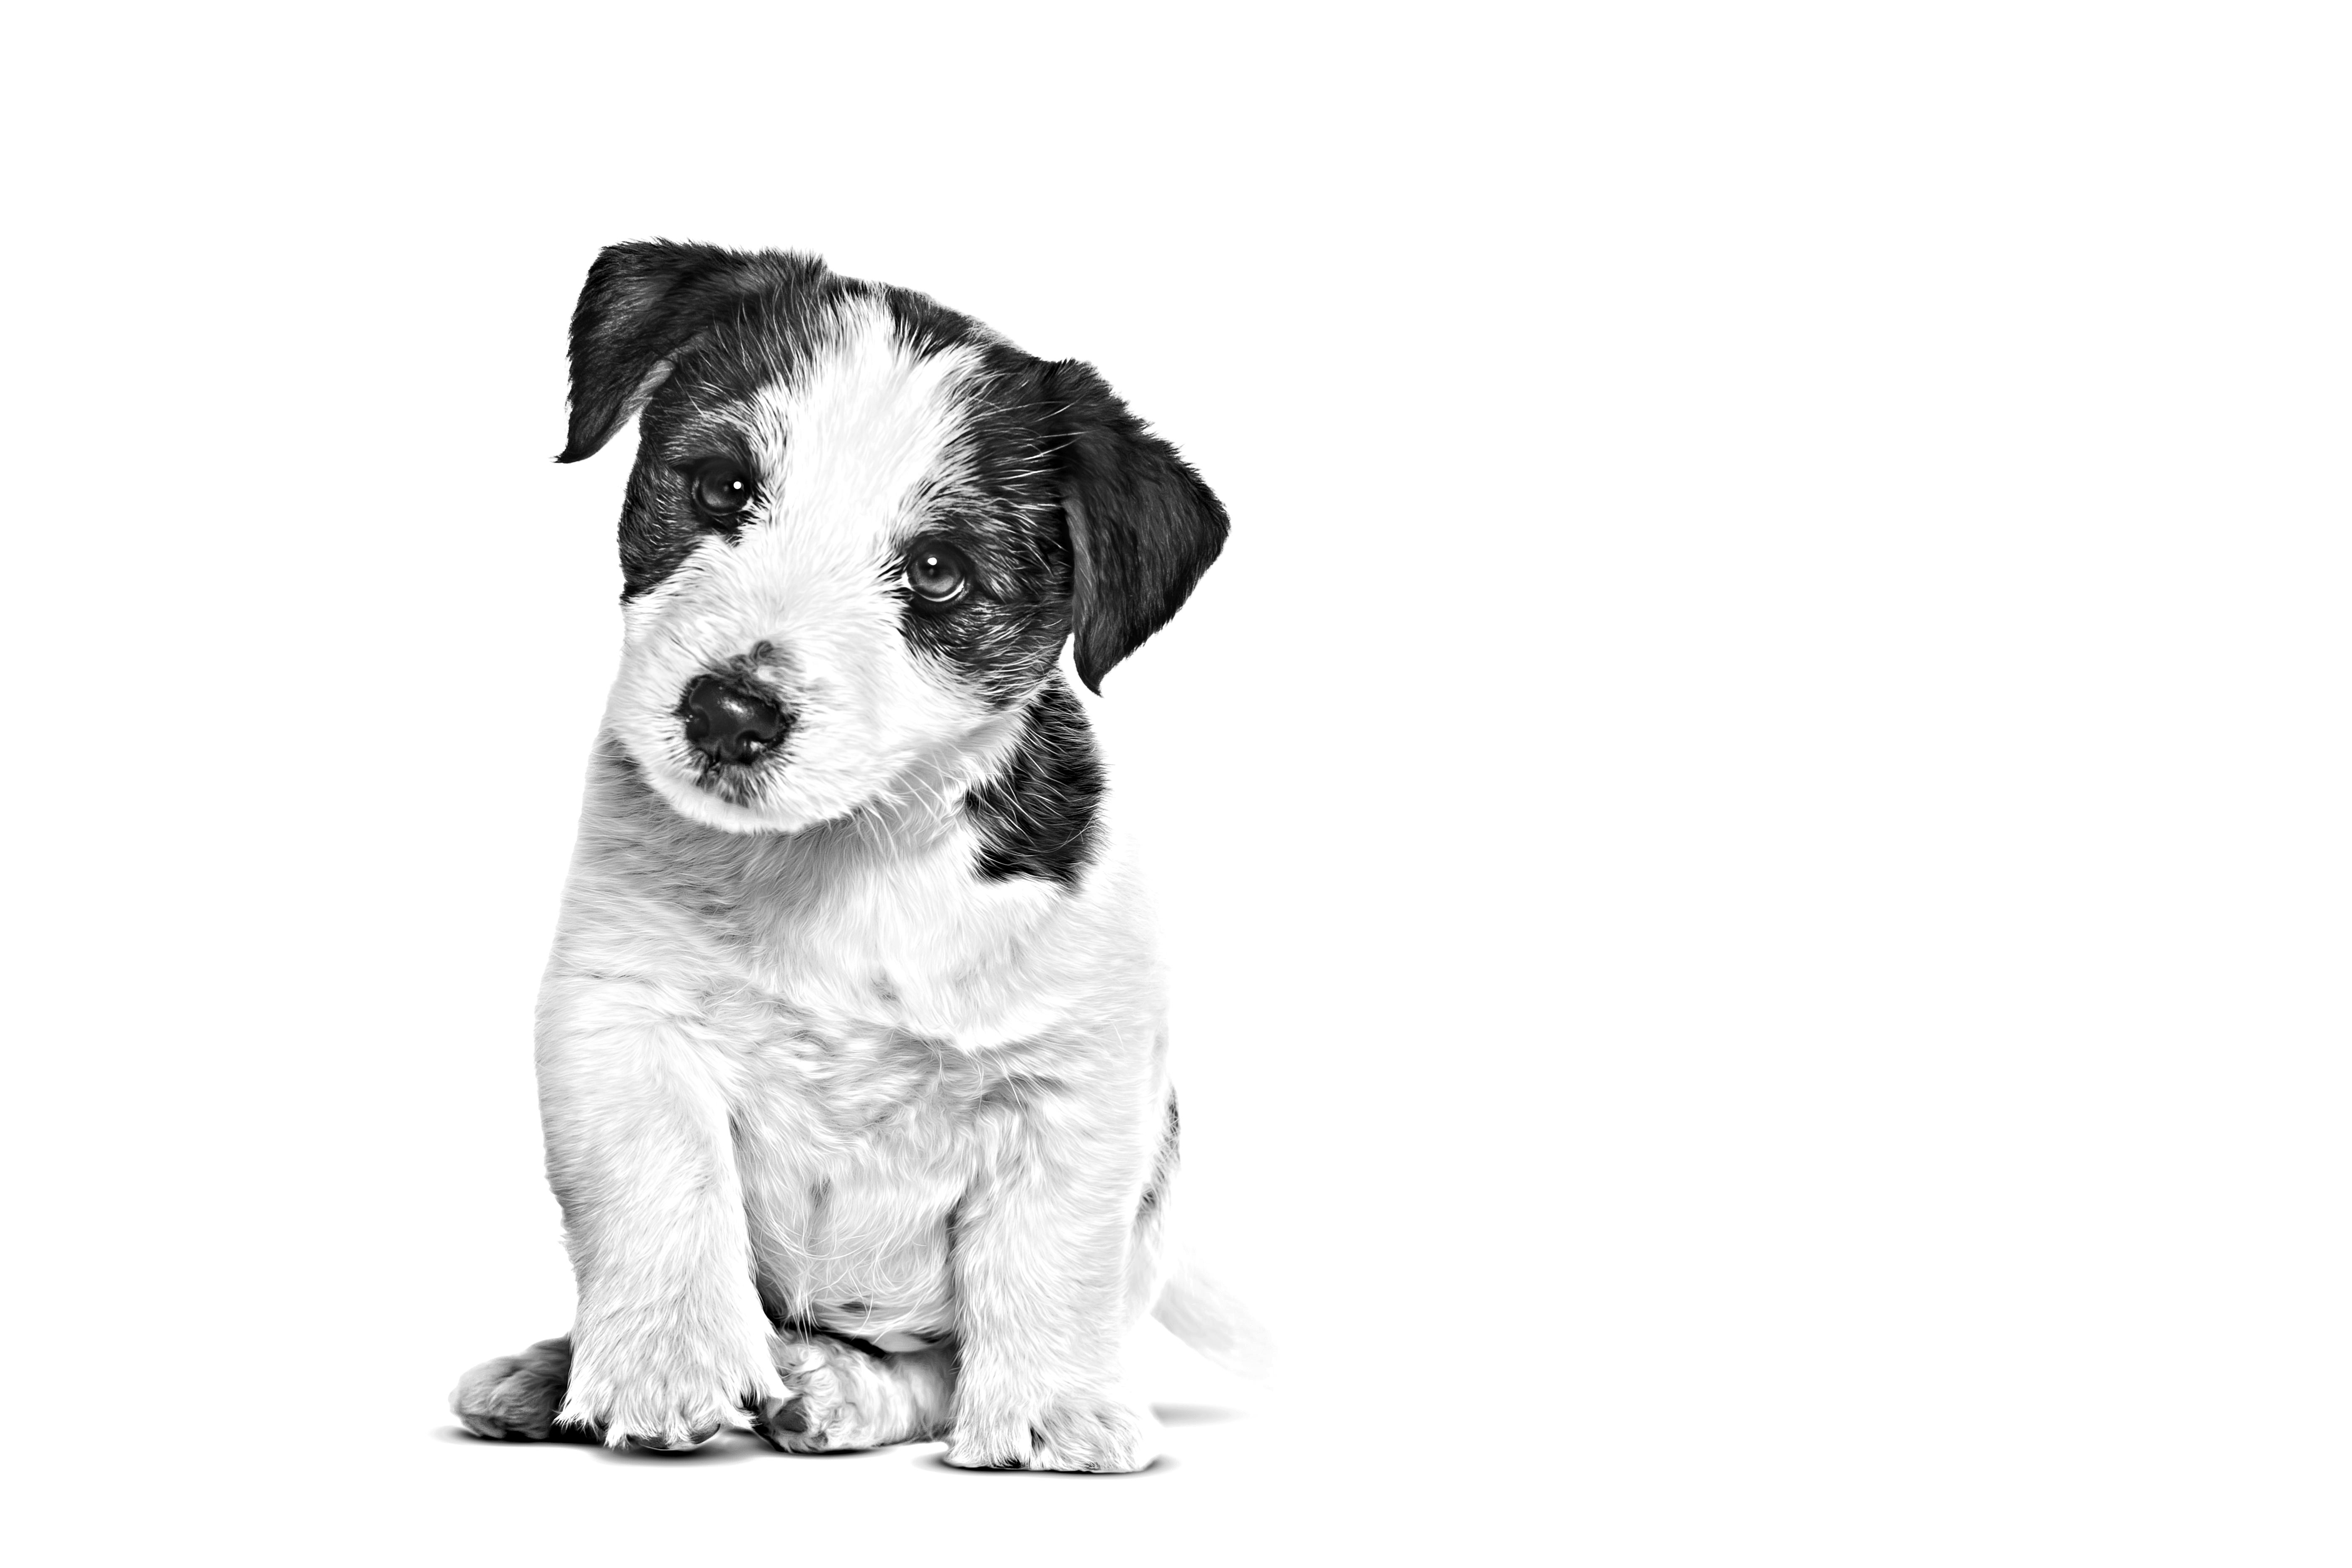 Jack Russell Terrier puppy sitting in black and white on a white background